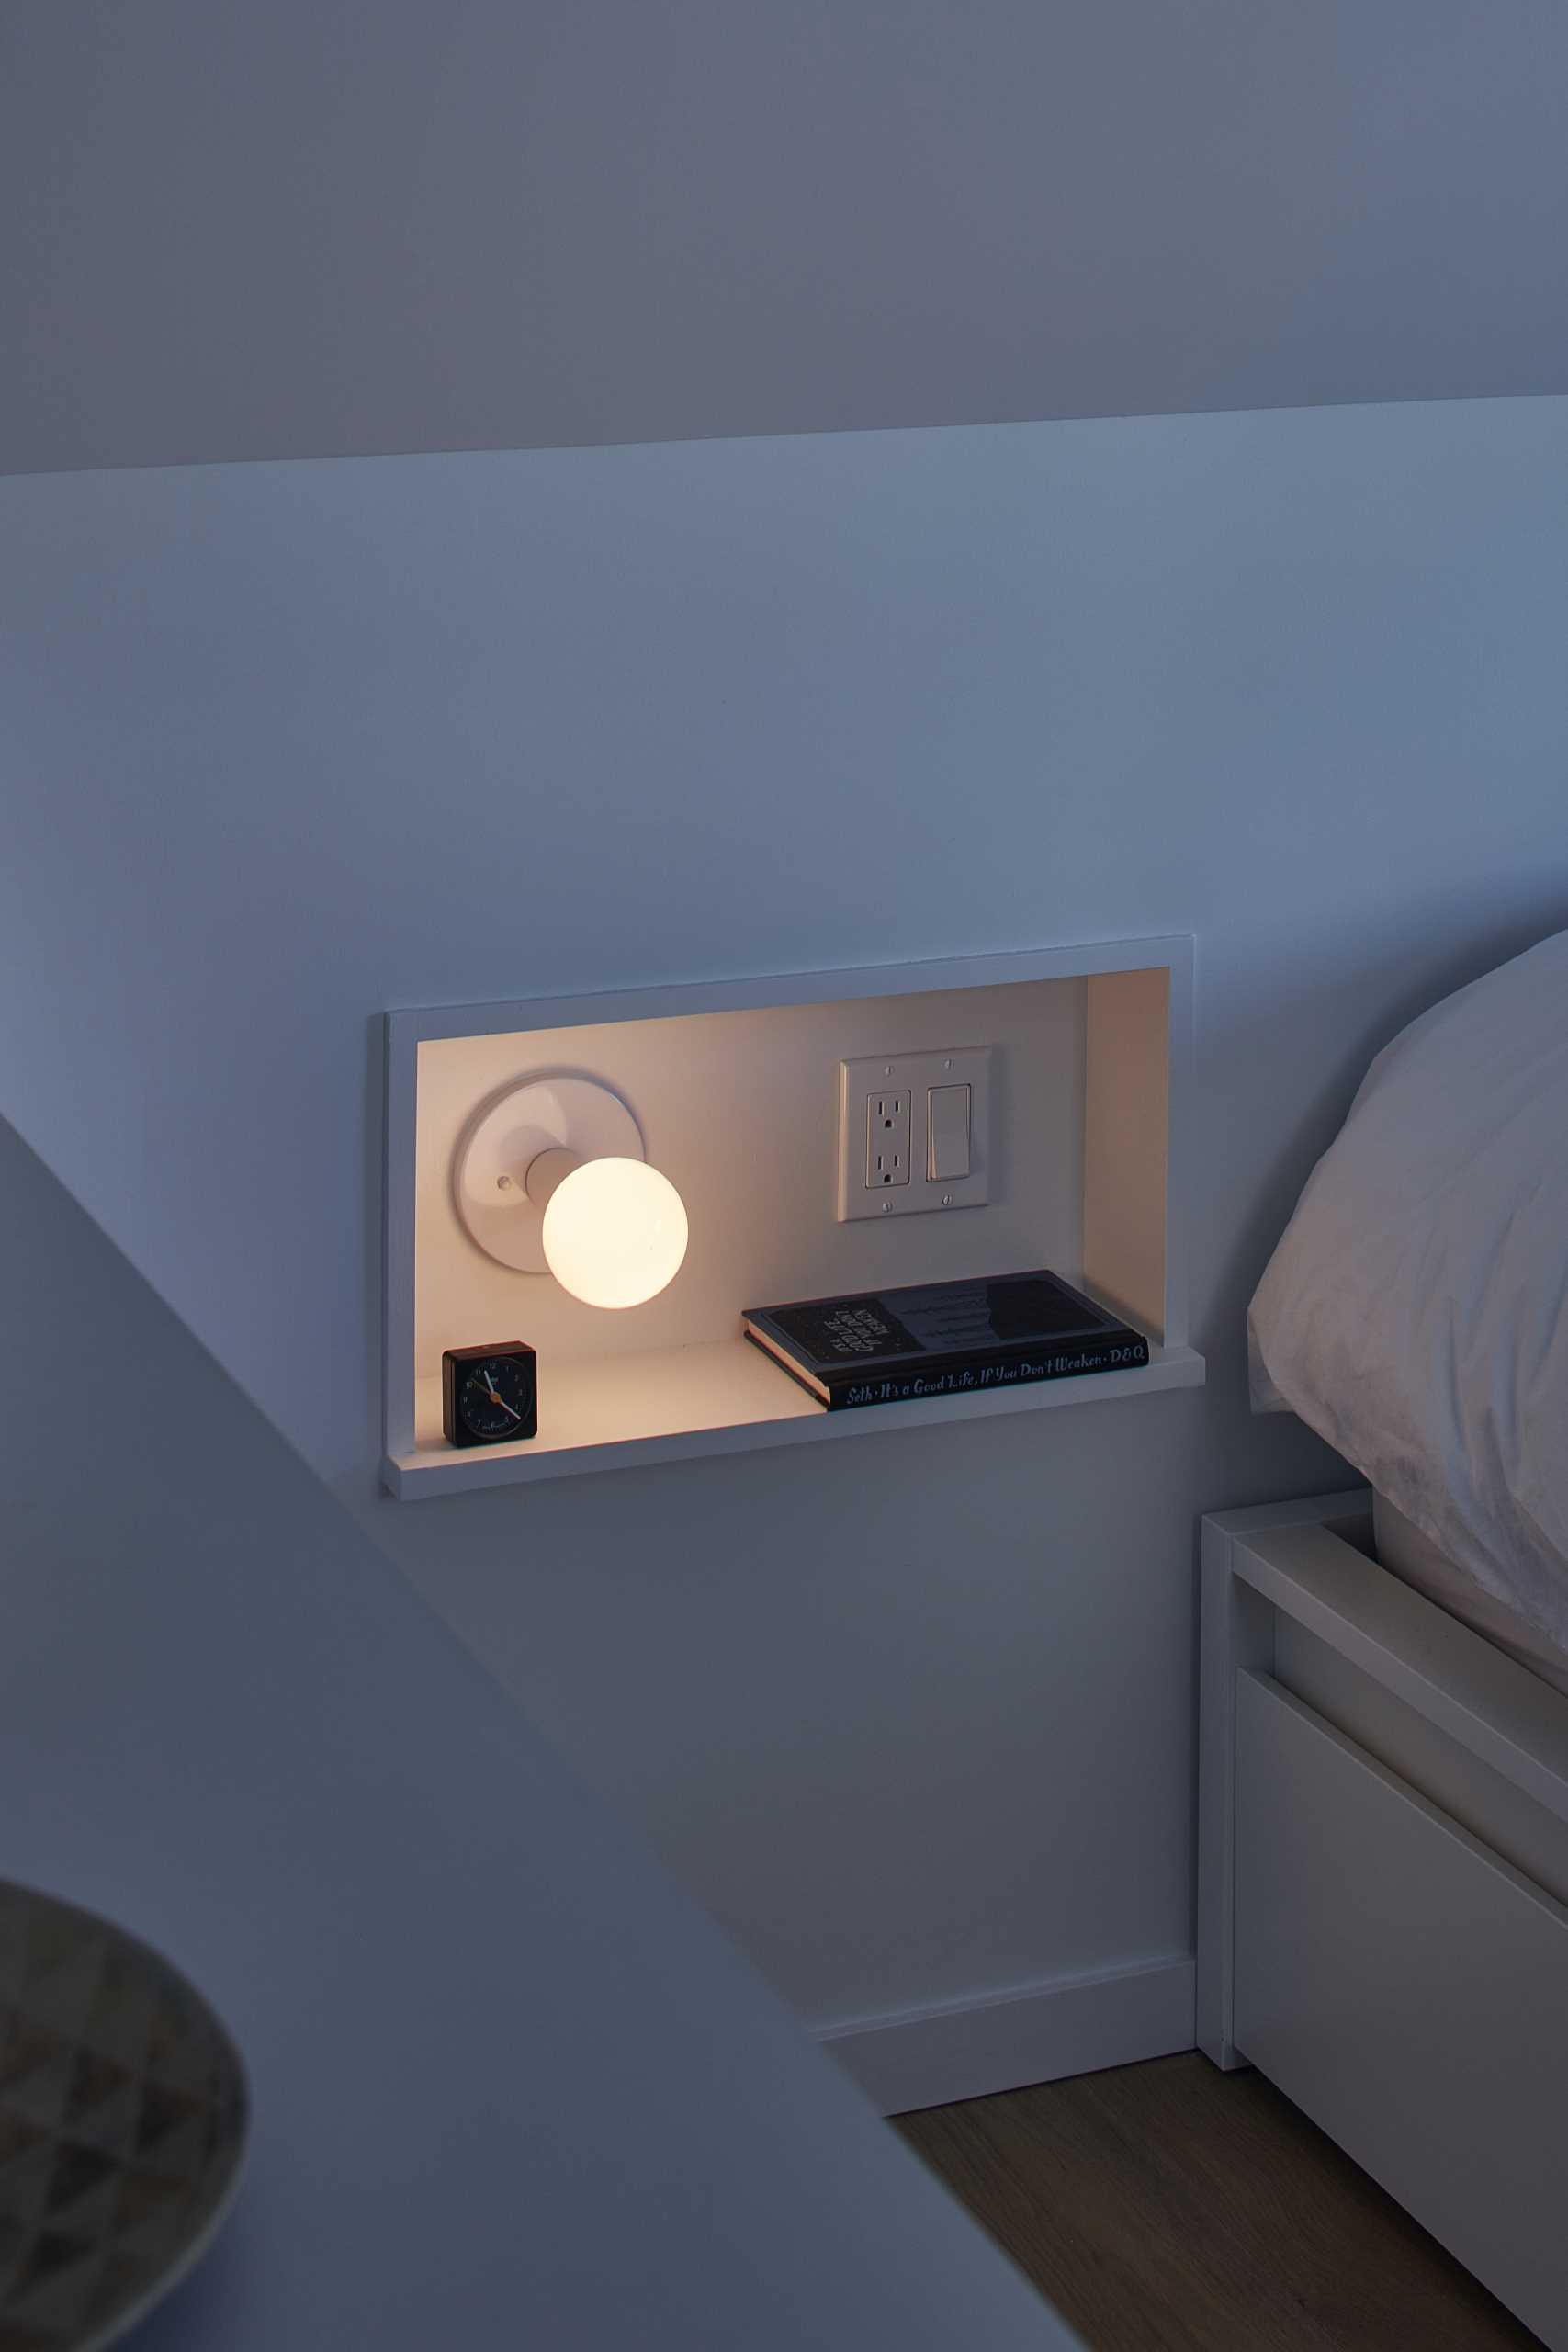 A small niche has been designed to act as a bedside table.